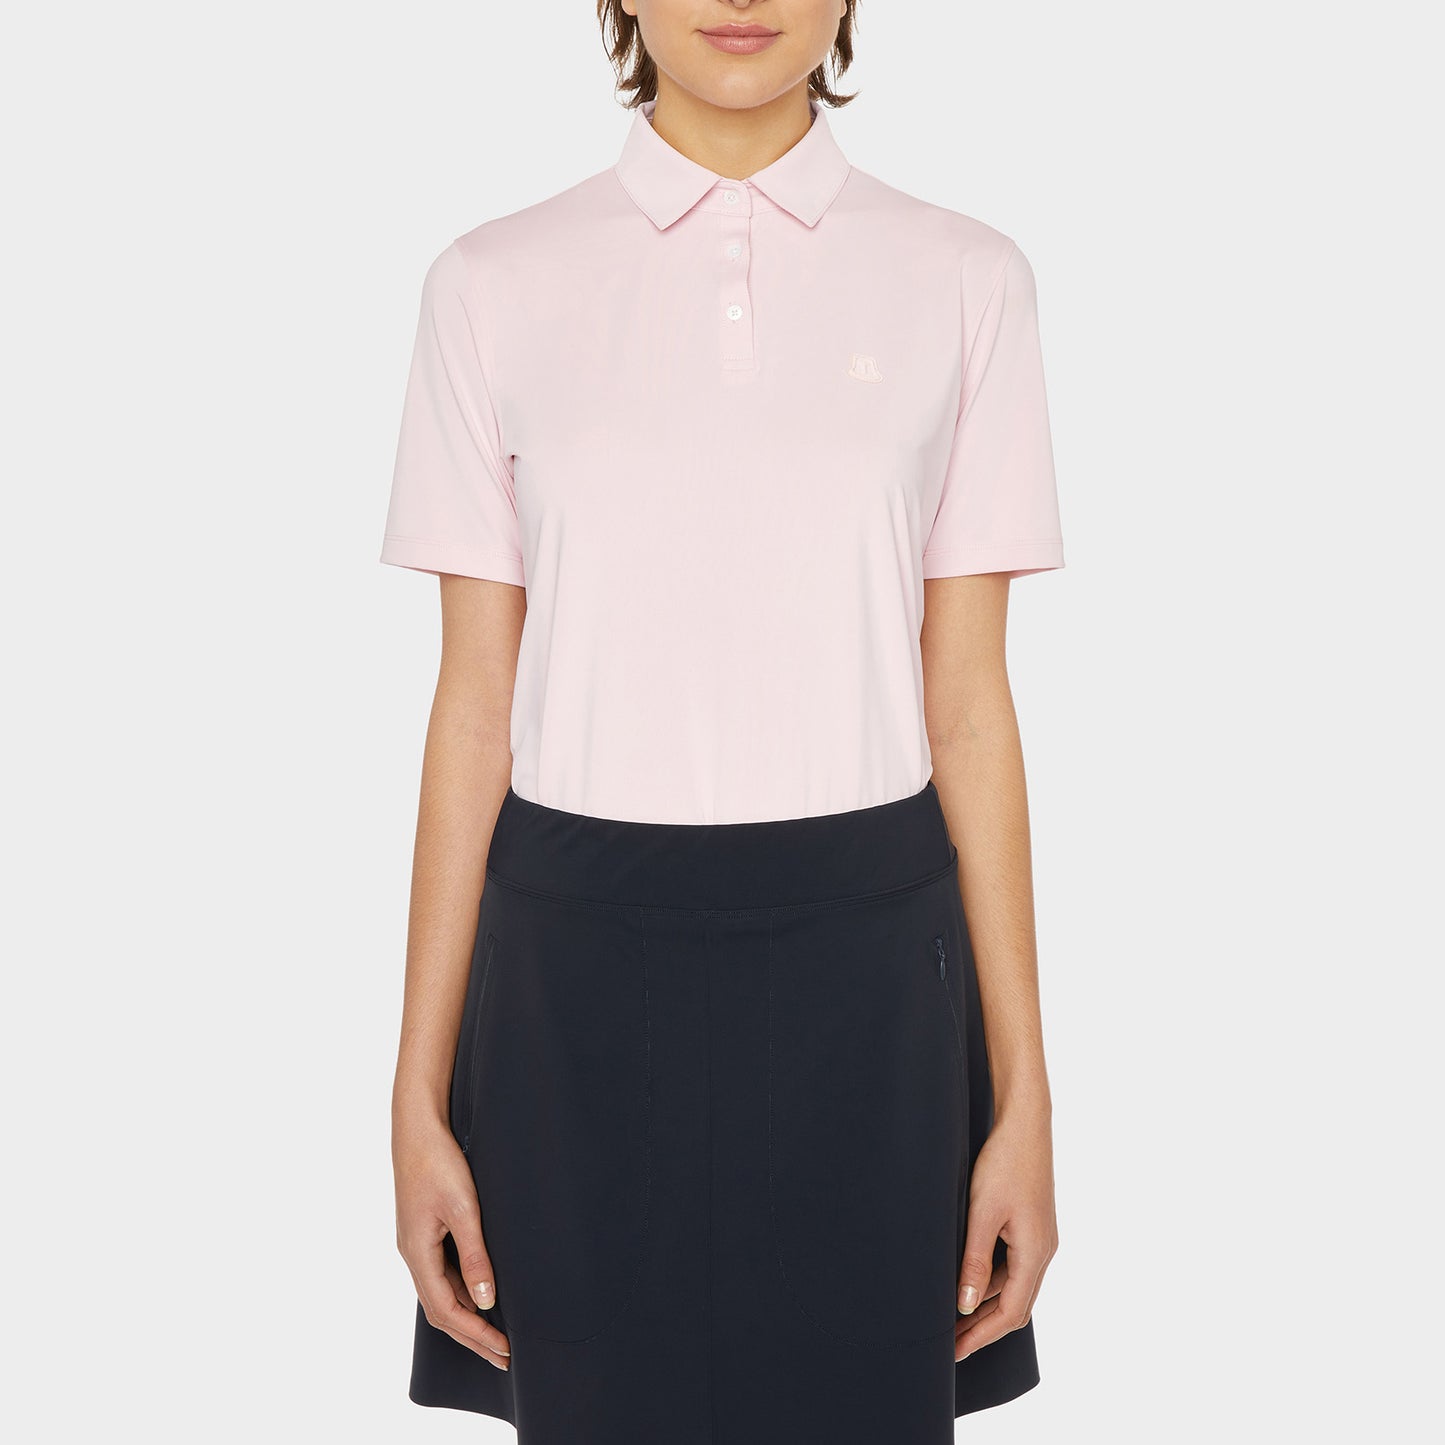 Club Classic Polo - Pink